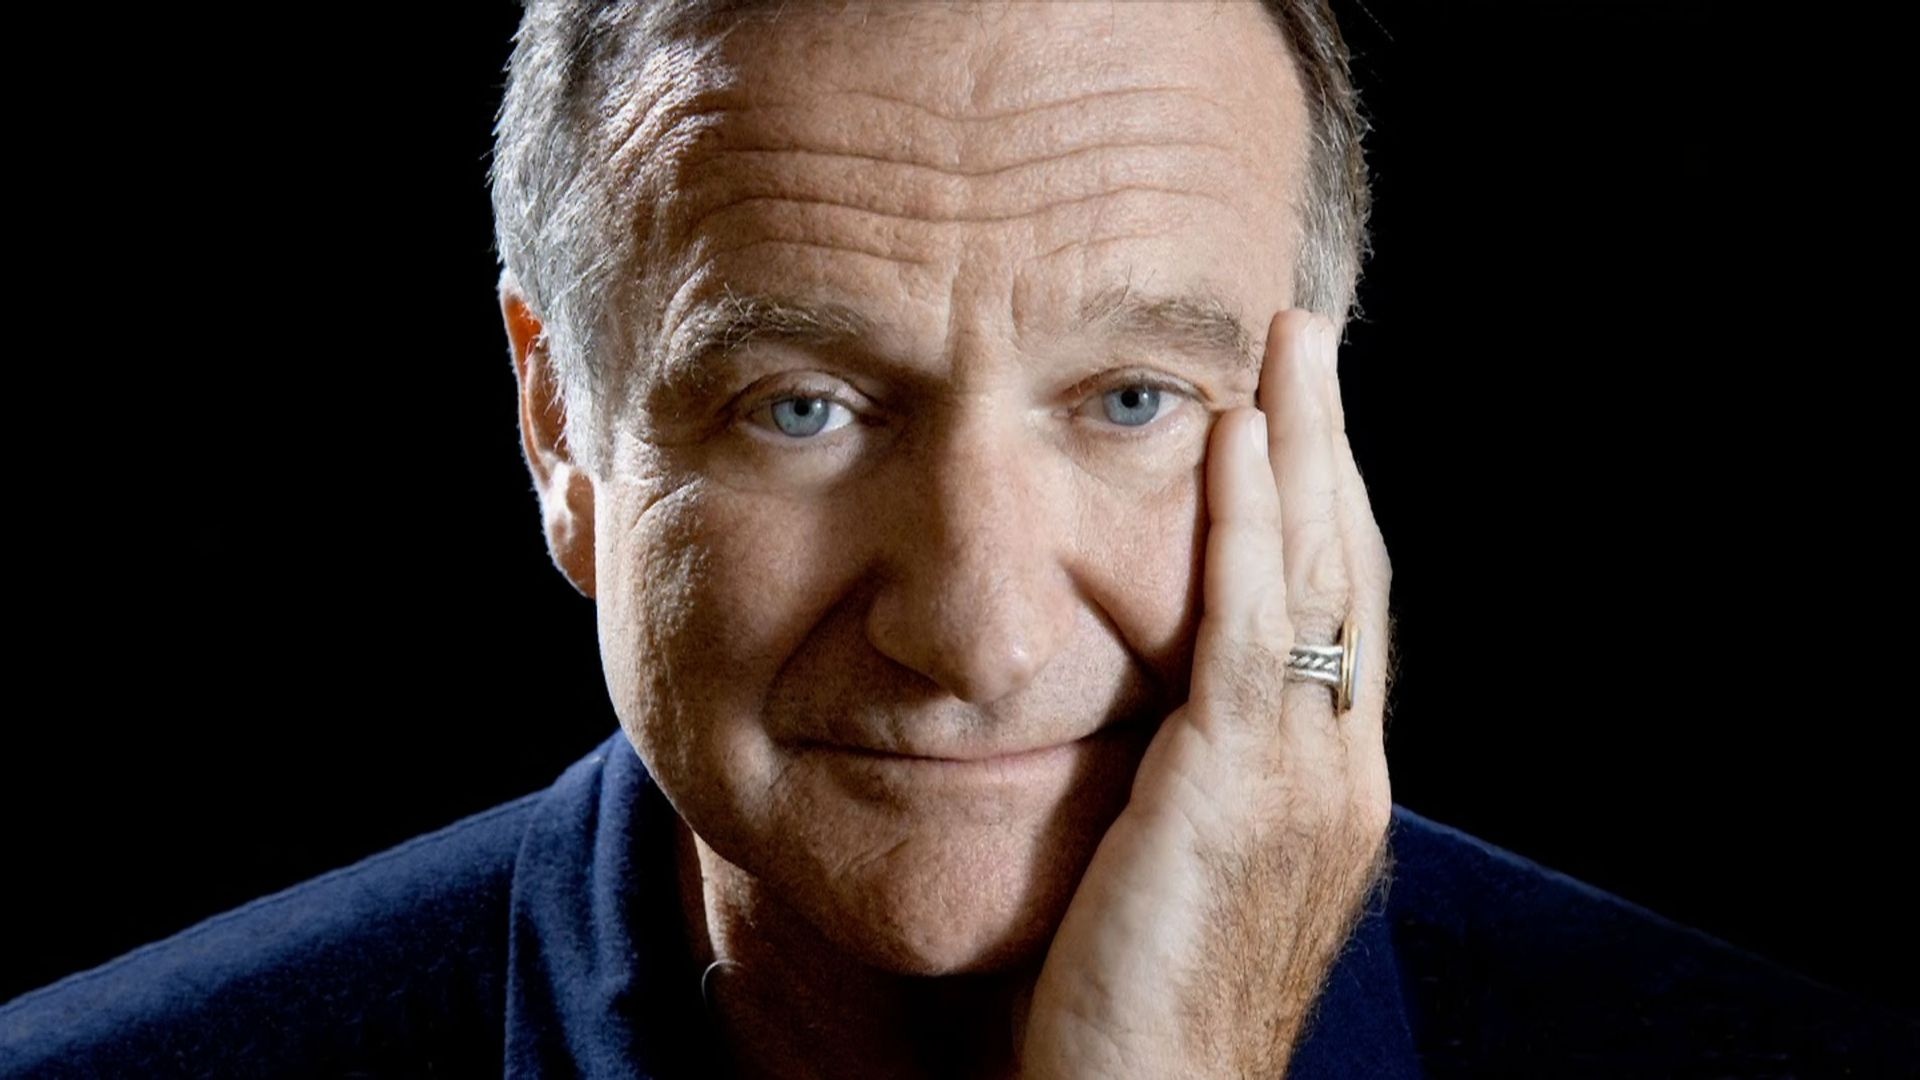 Robin Williams: Starred as Simon Roberts in an American television sitcom, The Crazy Ones. 1920x1080 Full HD Background.